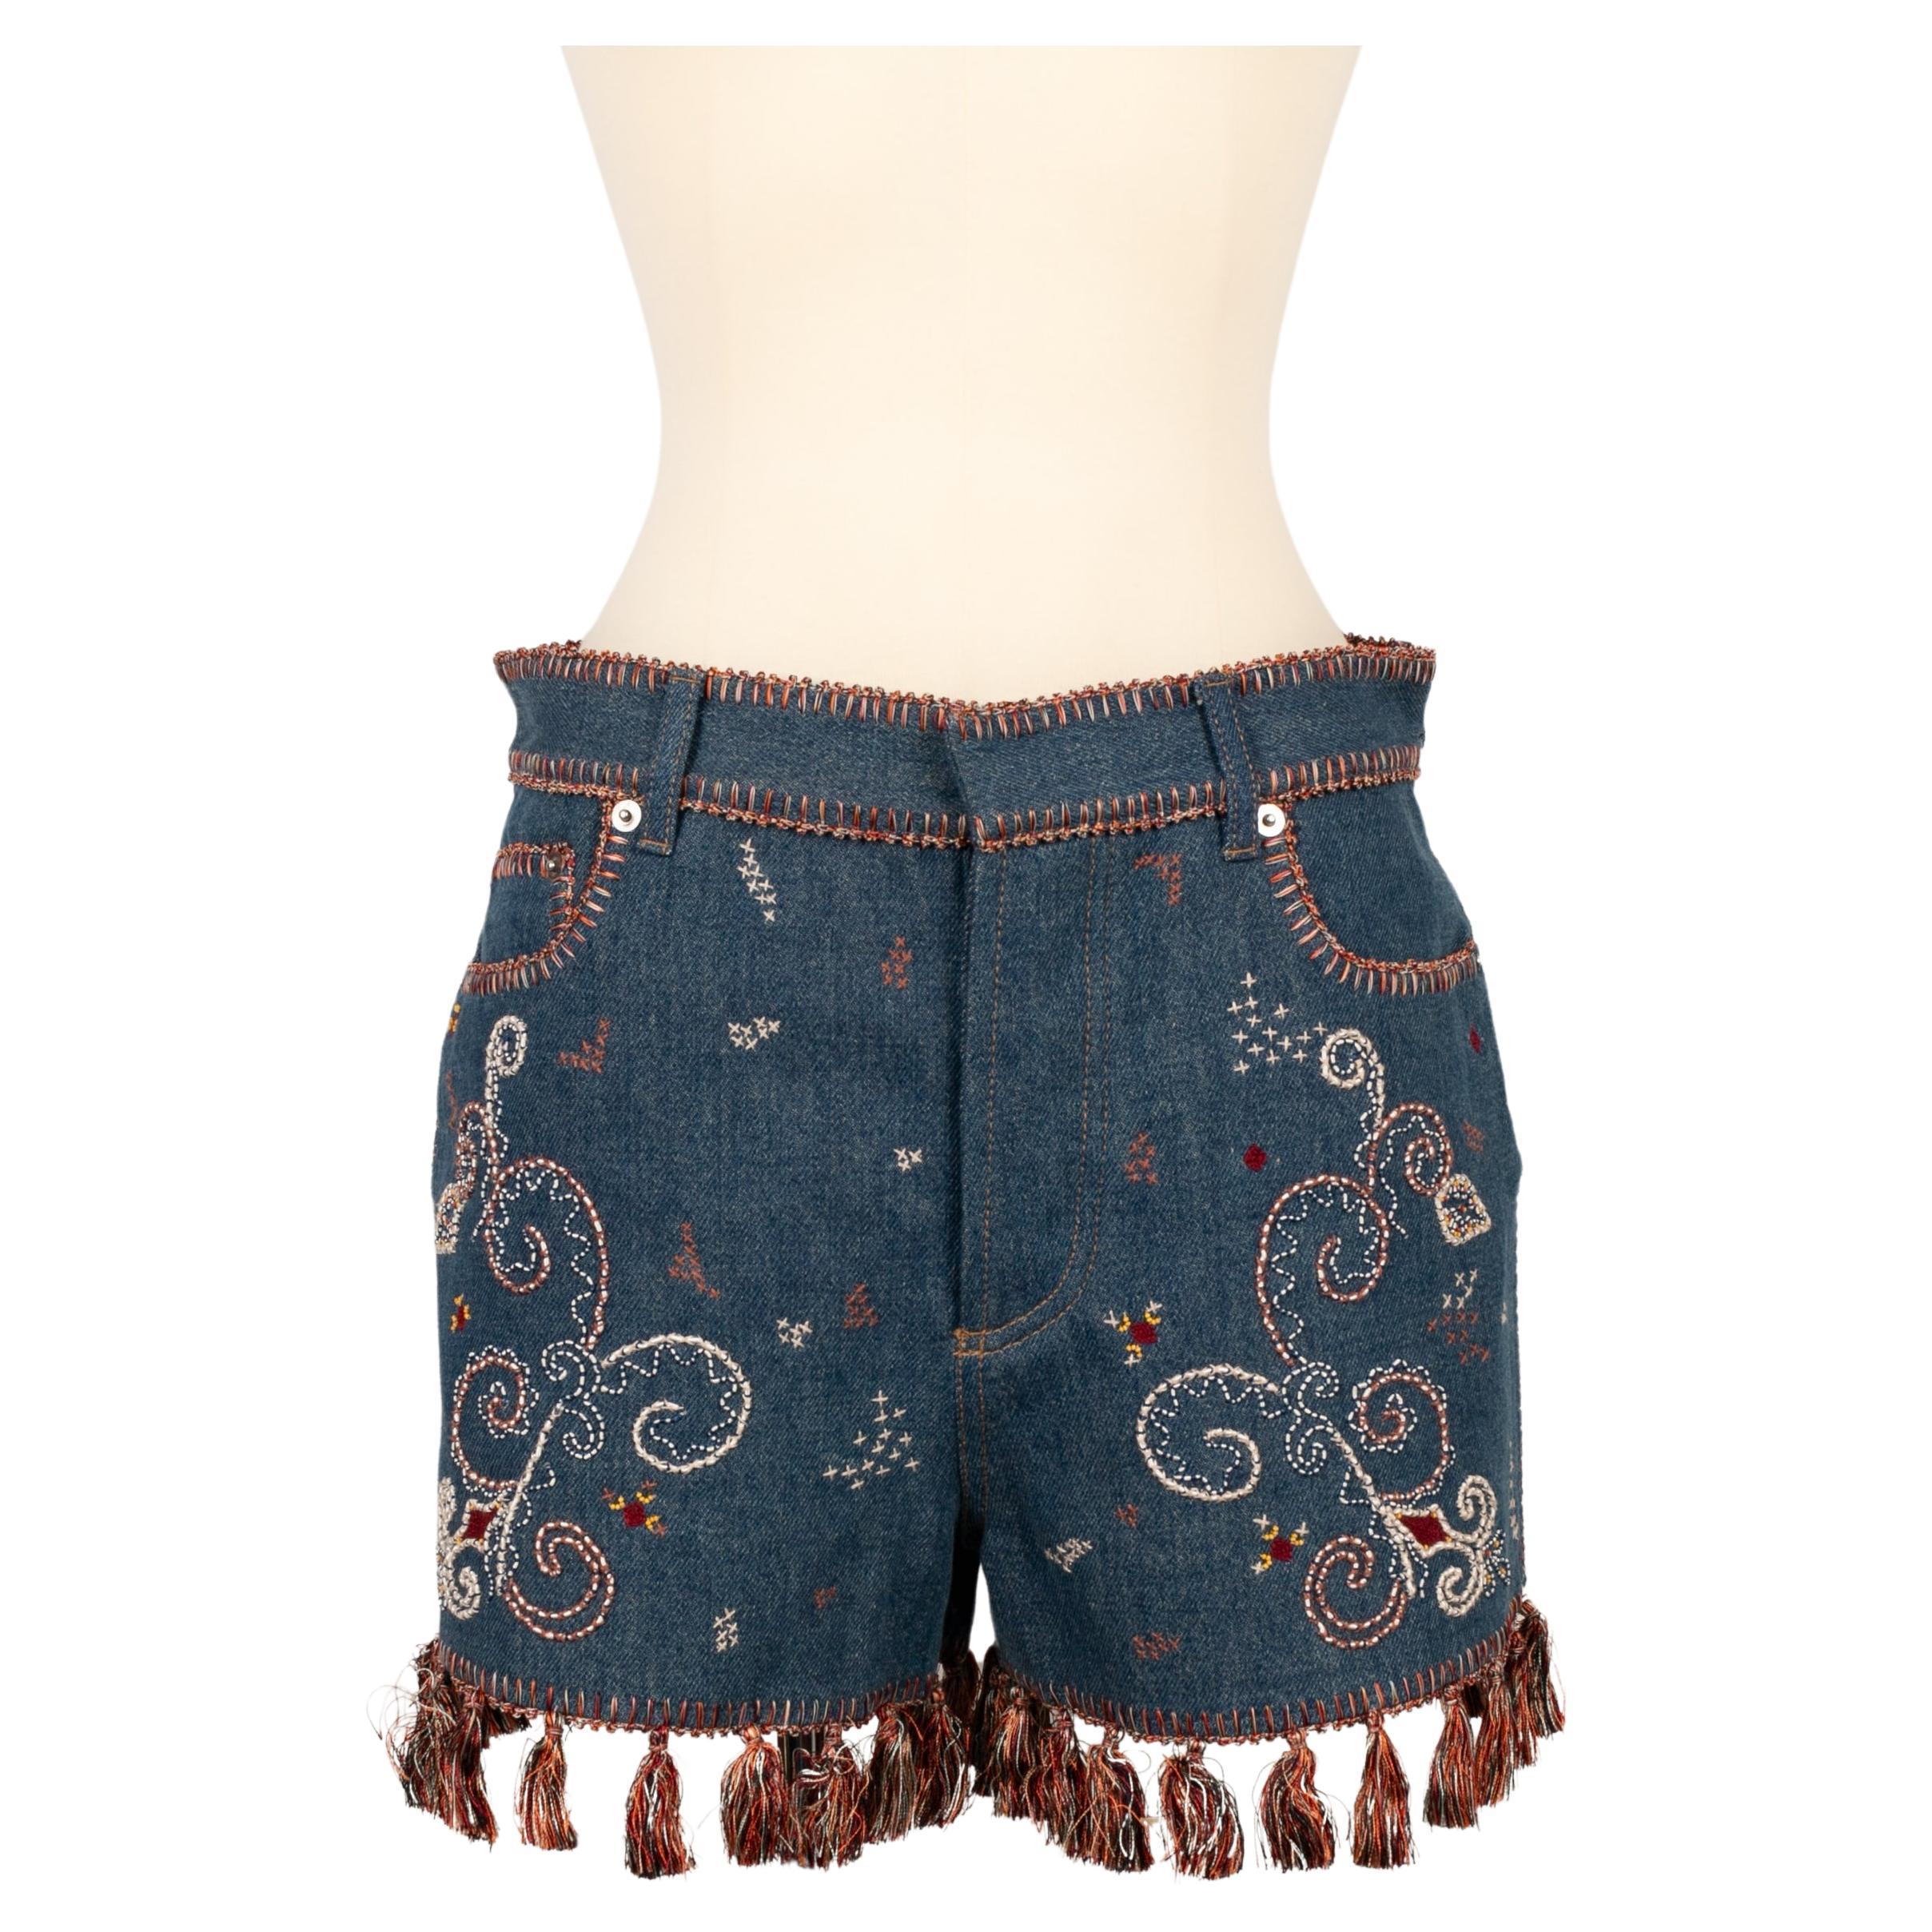 Dior Denim Shorts Sewn with Pearls and Trimmings Ornaments, 2008